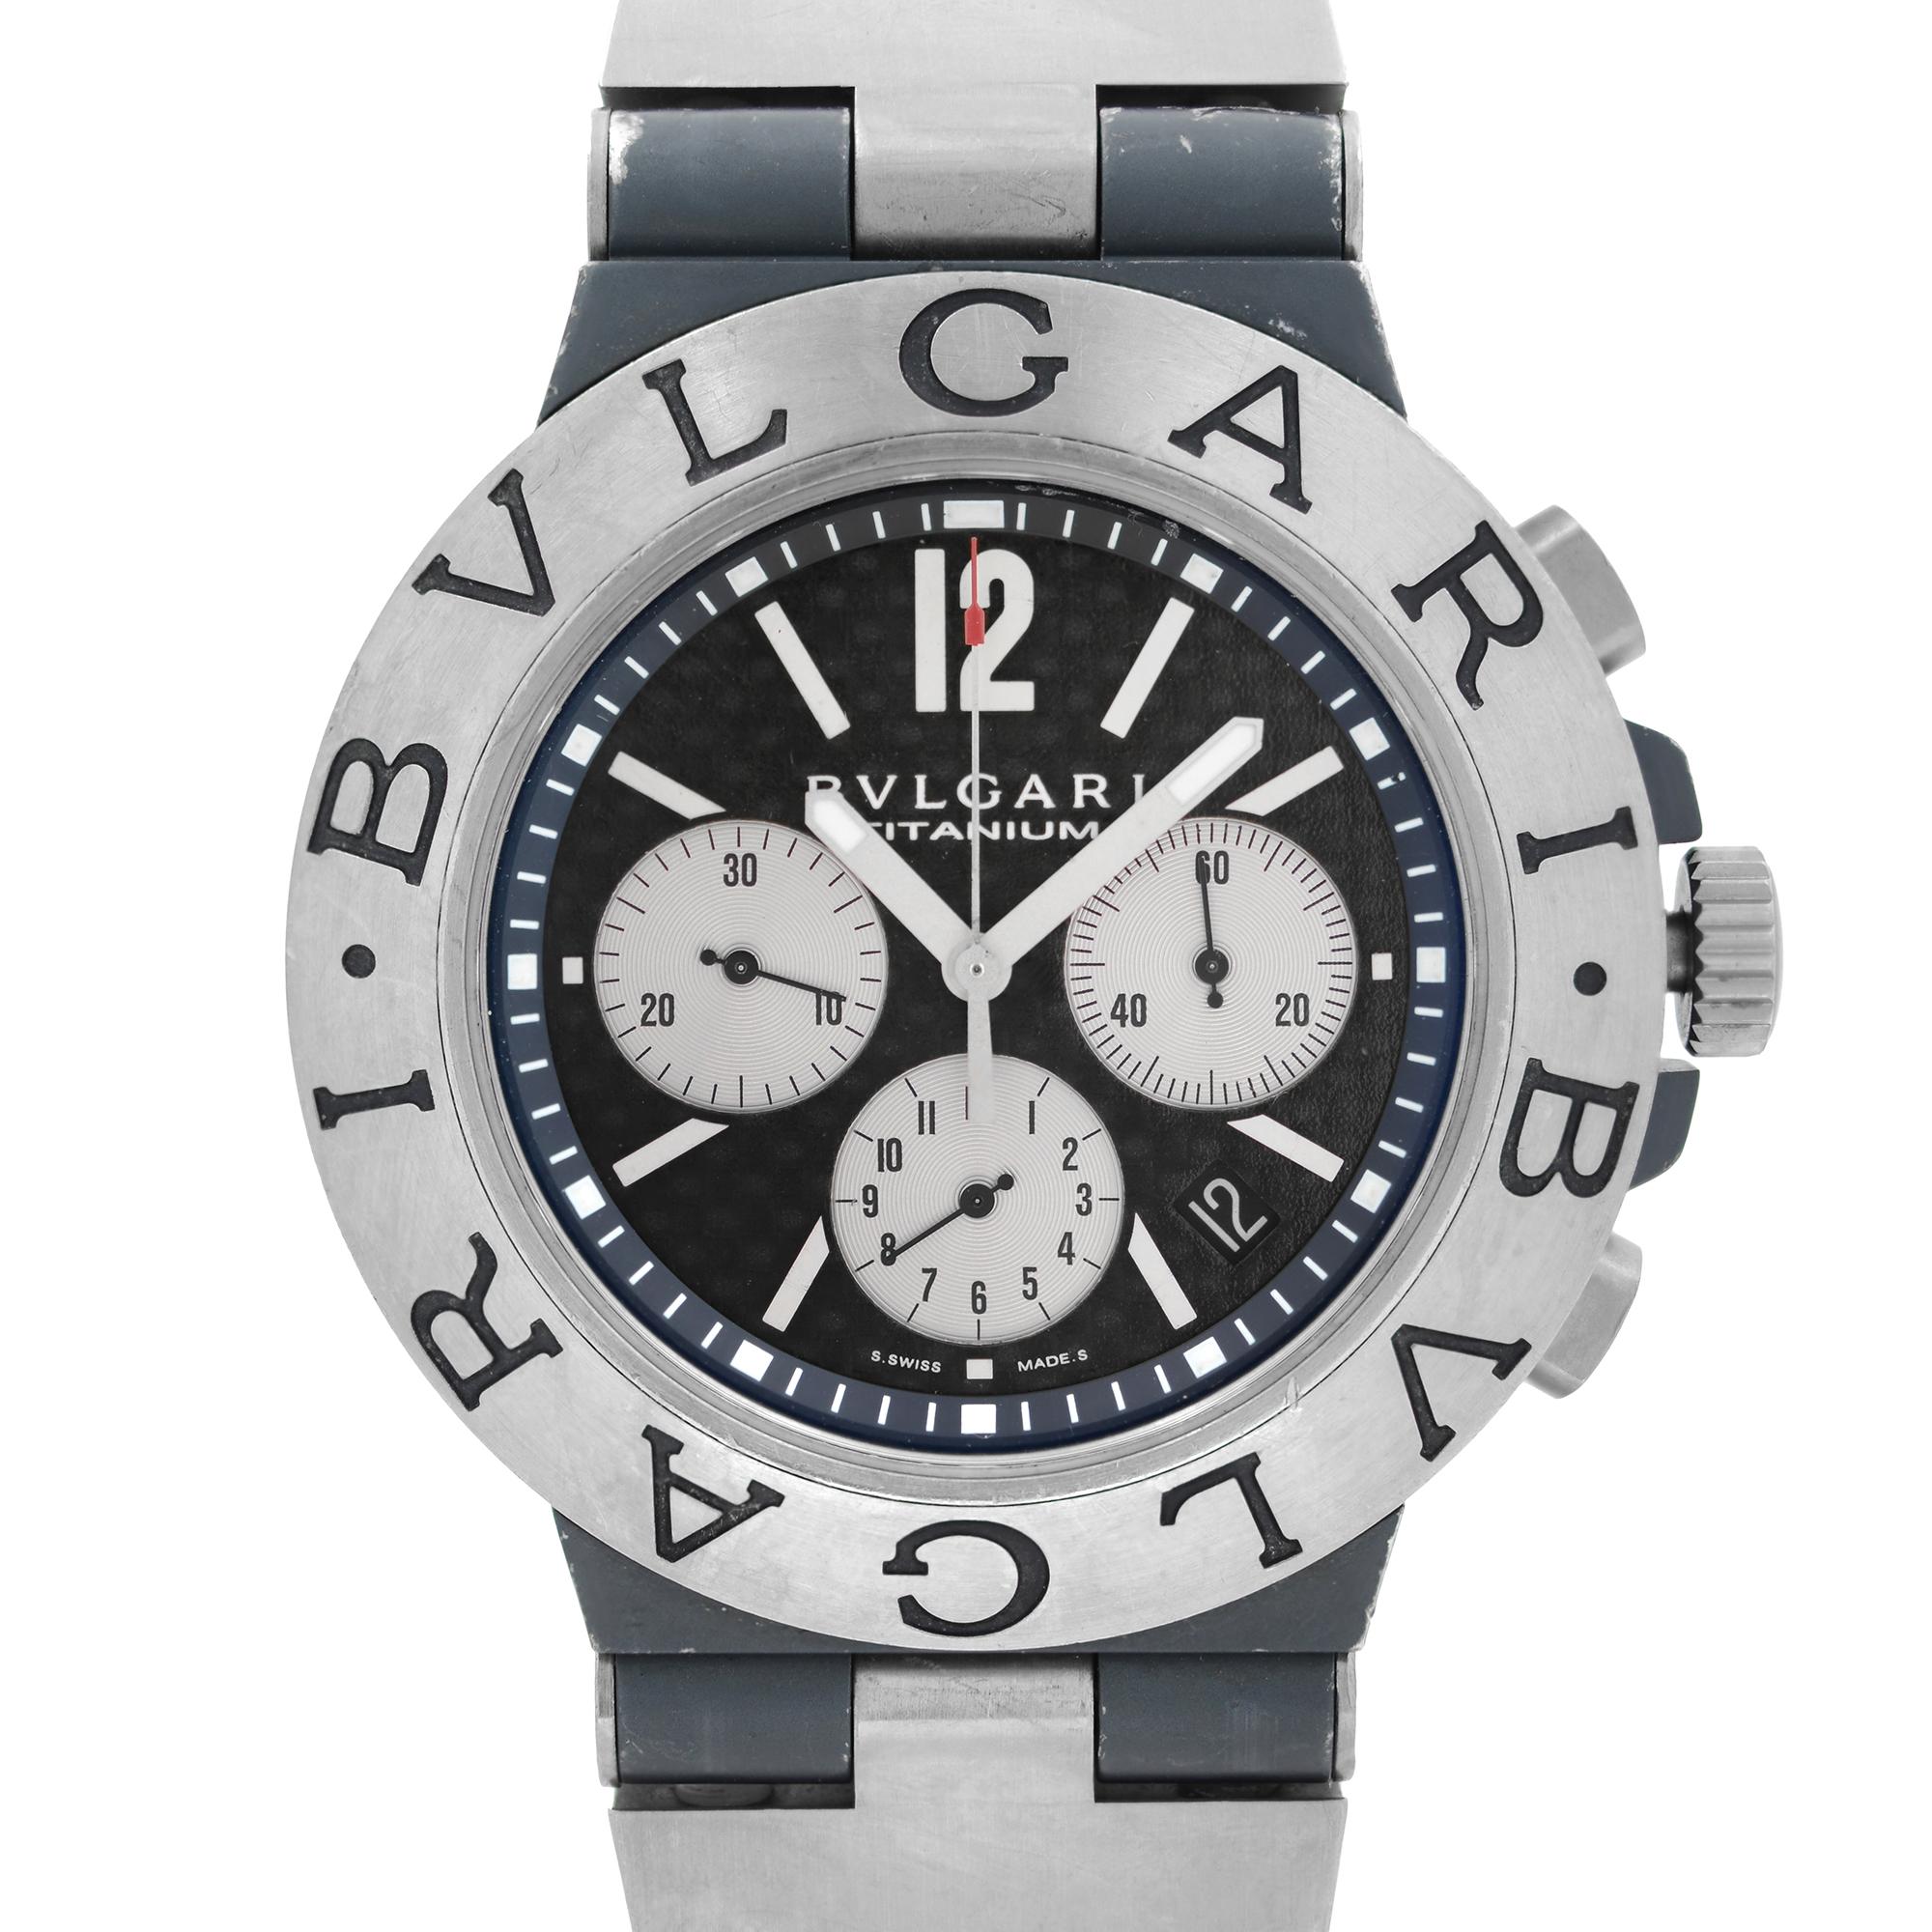 Pre-owned Bvlgari Diagono Chronograph Titanium Black Dial Automatic Men's Watch TI44TACH. No Original Box and Papers are Included. Comes with Chronostore Presentation Box and Authenticity Card. Covered by 1-year Chronostore Warranty.
Details:
Brand